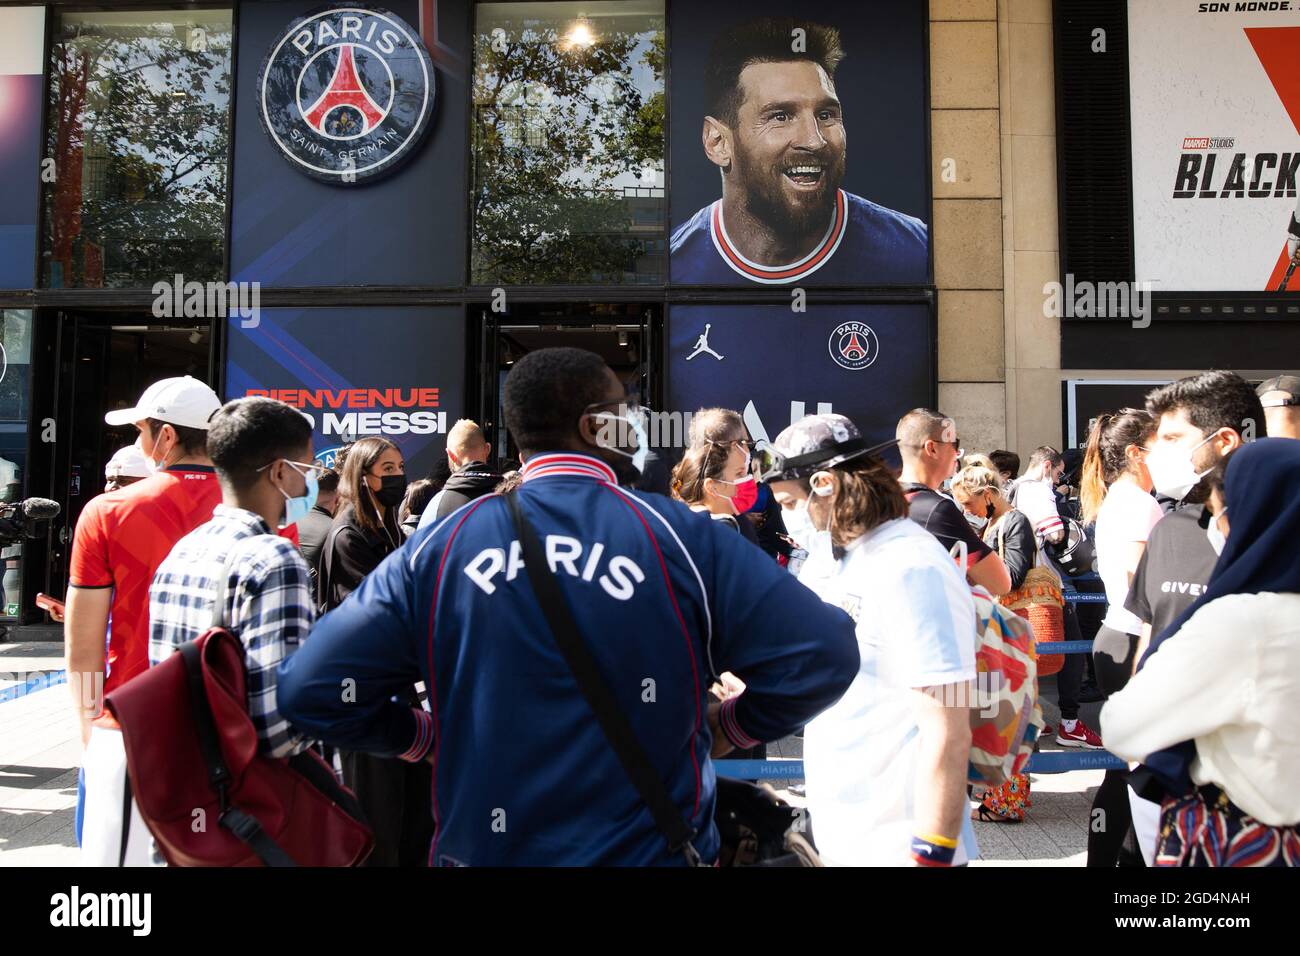 Paris, France. 11th Aug, 2021. People queue to buy a jersey of PSG's Argentinian football player Lionel Messi at the Paris-Saint-Germain (PSG) football club store on the Champs Elysees avenue in Paris on August 11, 2021. Messi signed on August 10, 2021 a two-year deal with PSG with the option of an additional year. The 34-year-old will wear the number 30 in Paris, the number he had when he began his professional career at Barca. Photo by Raphael Lafargue/ABACAPRESS.COM Credit: Abaca Press/Alamy Live News Stock Photo